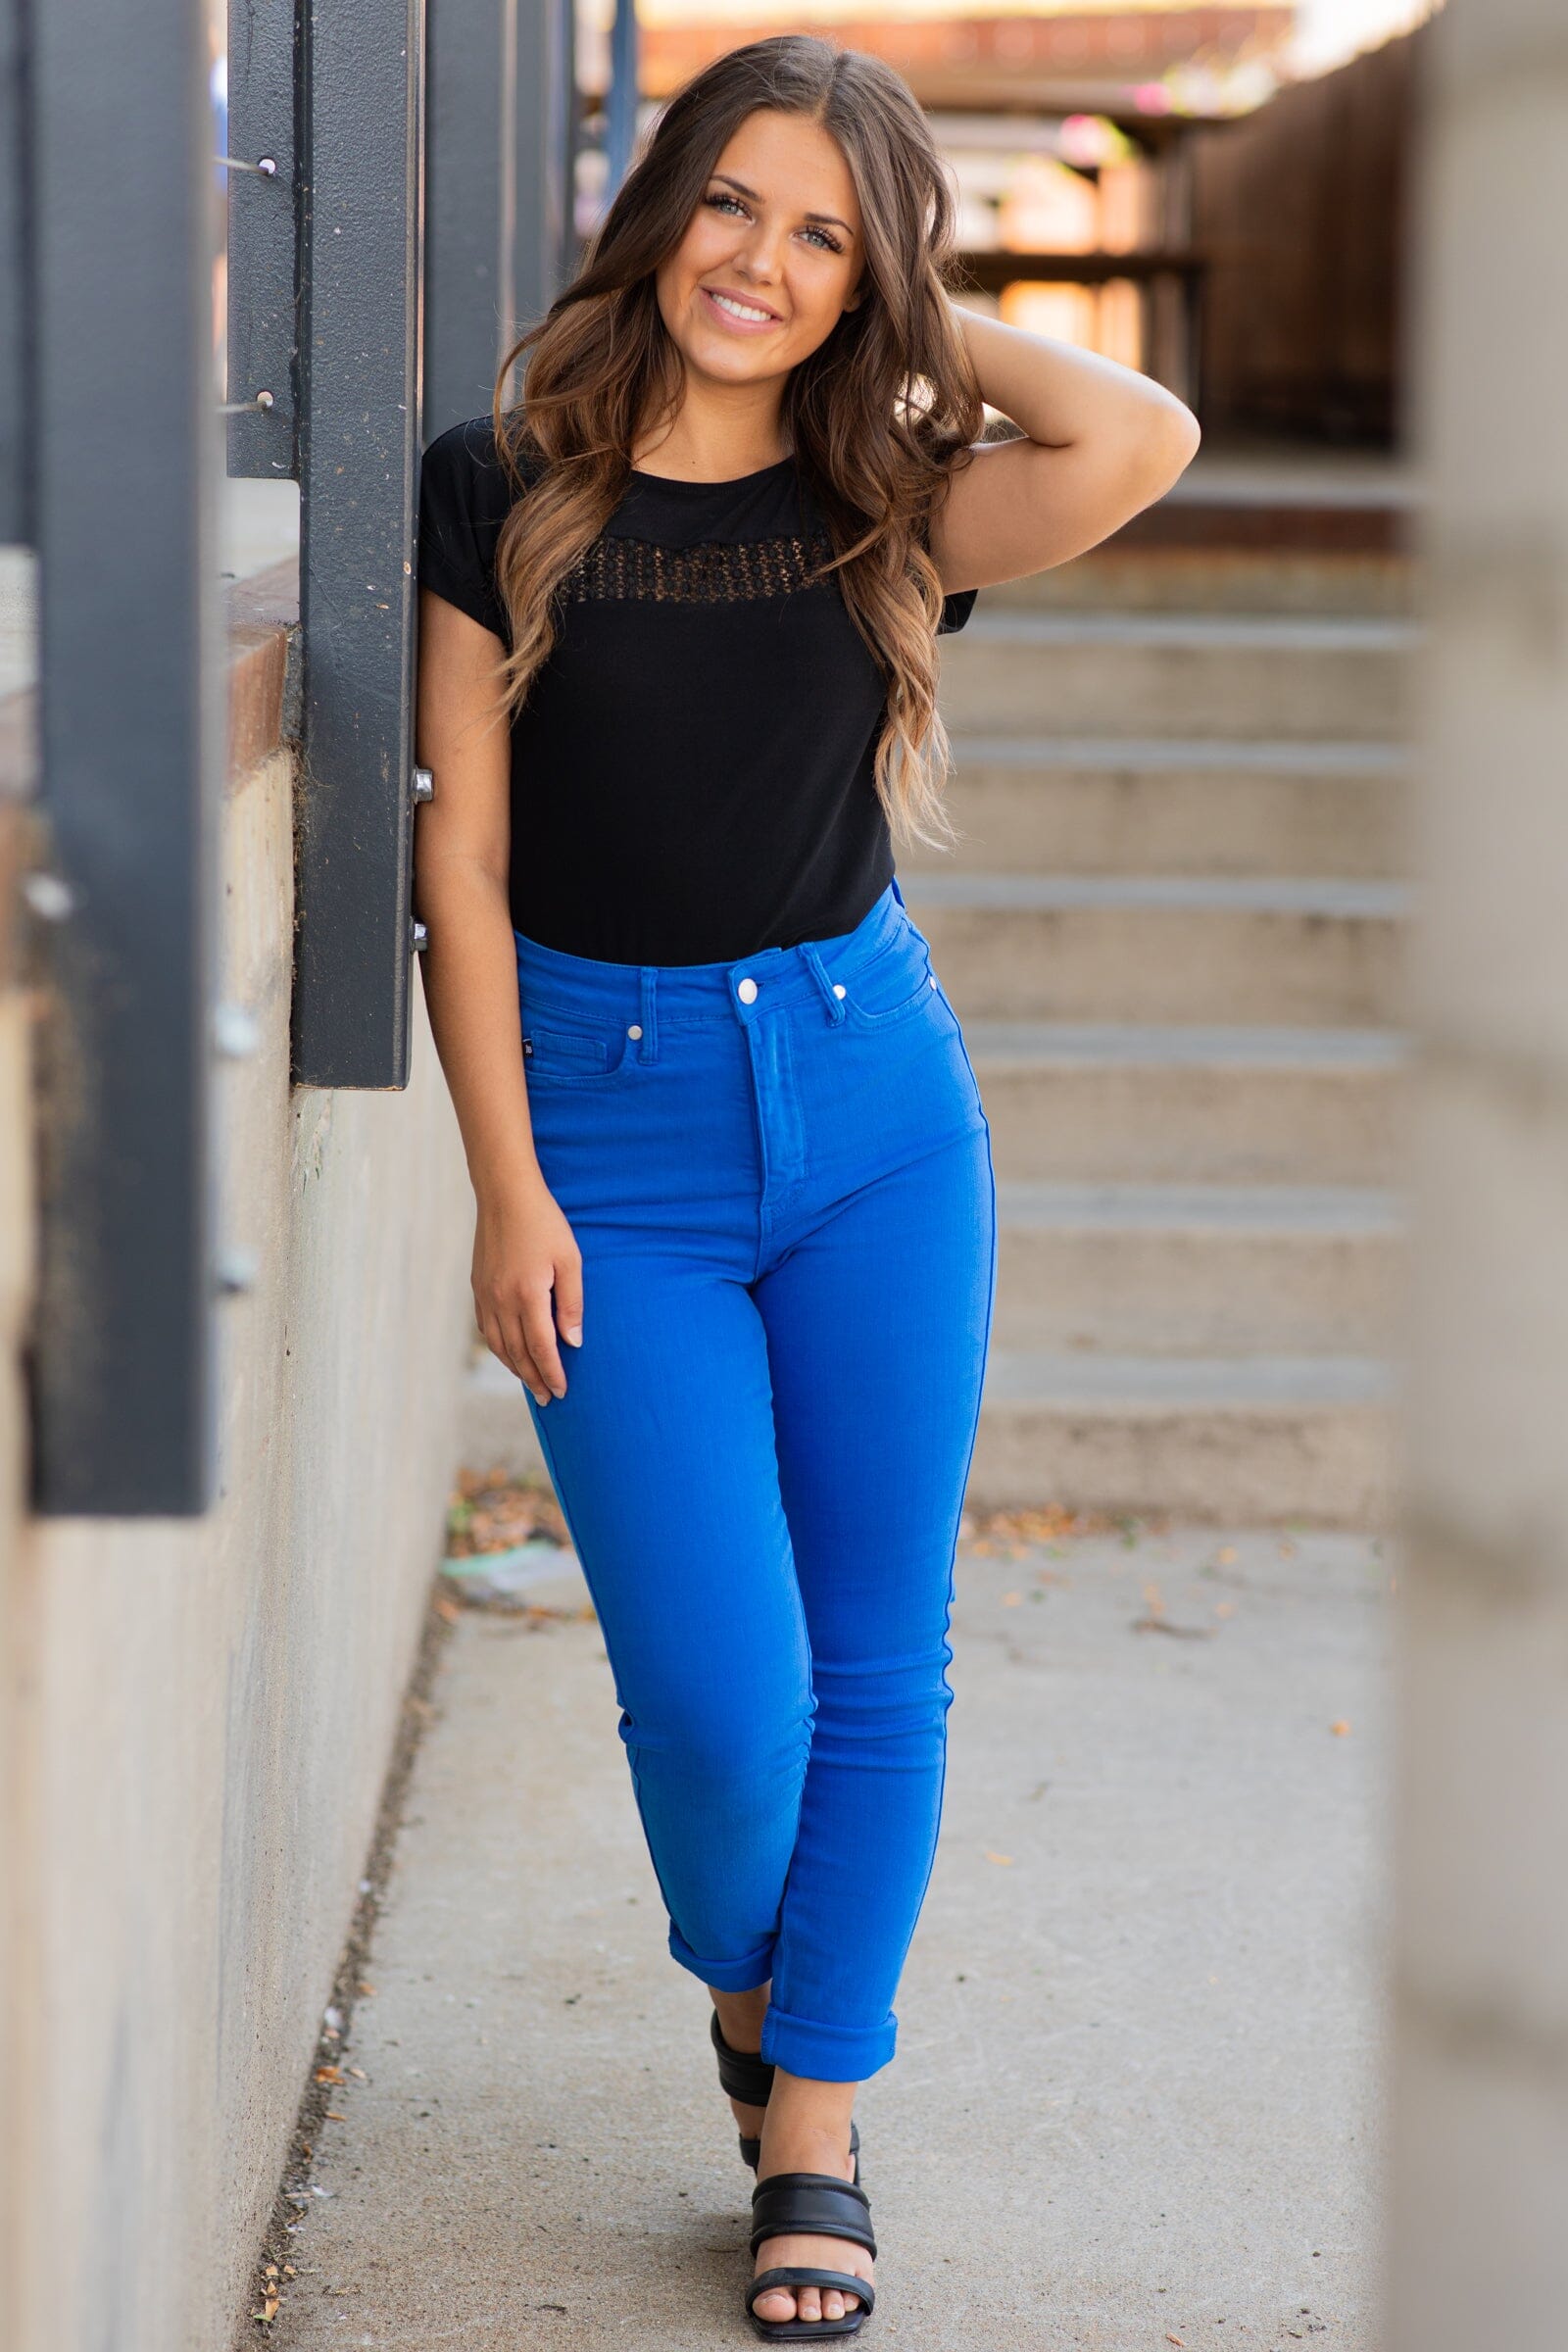 Cobalt blue shirt, jeans and black boots, informal outfit